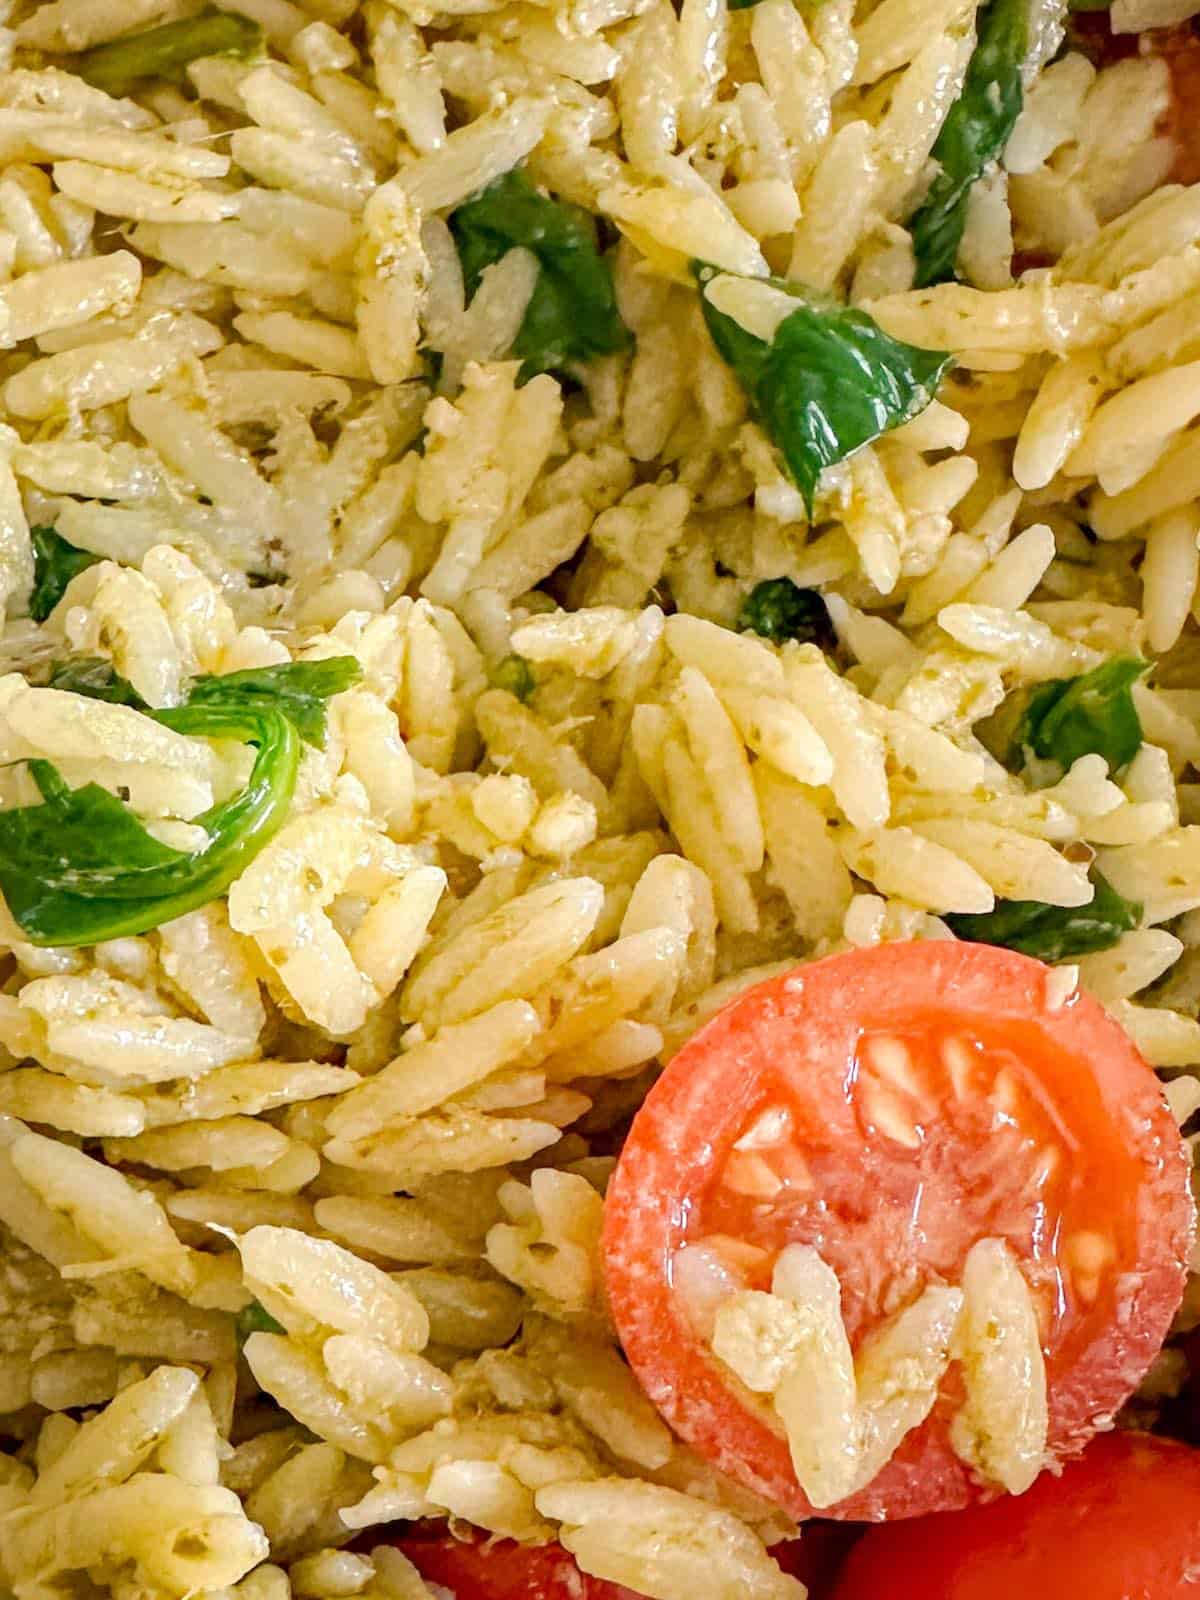 Pesto sauce added to the cooked orzo, spinach and tomatoes.